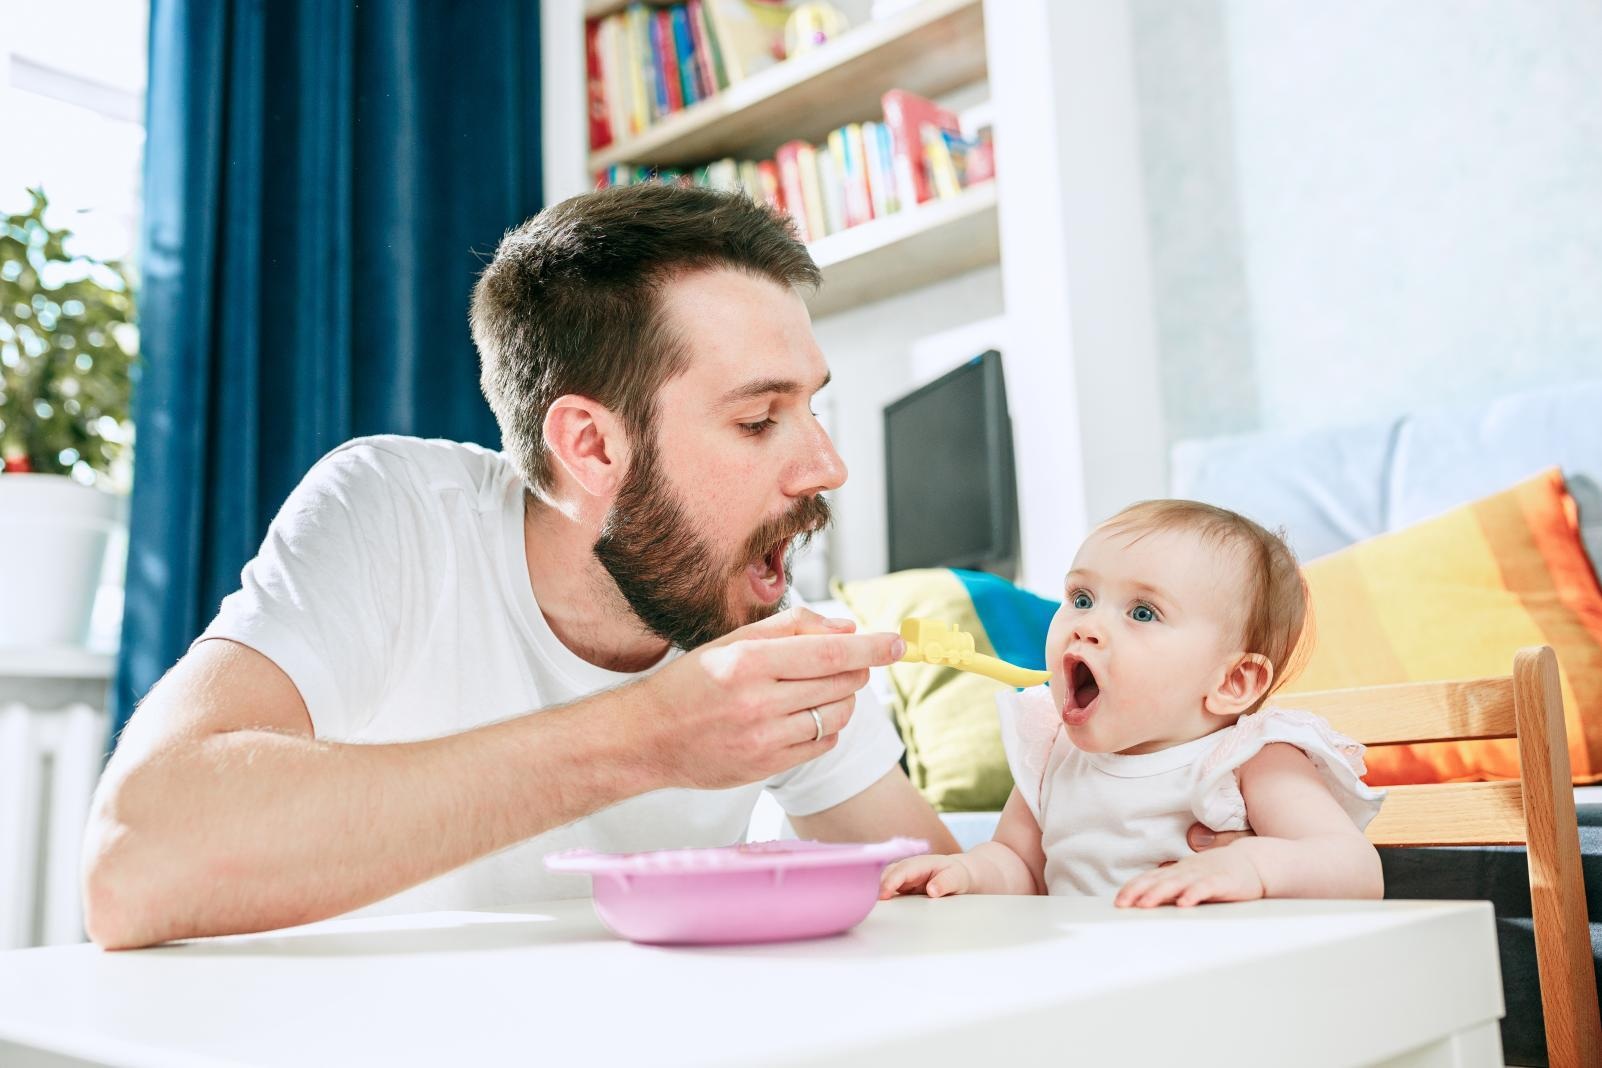 Top 3 Things To Be Taken Care Of When Getting Food For Your Baby